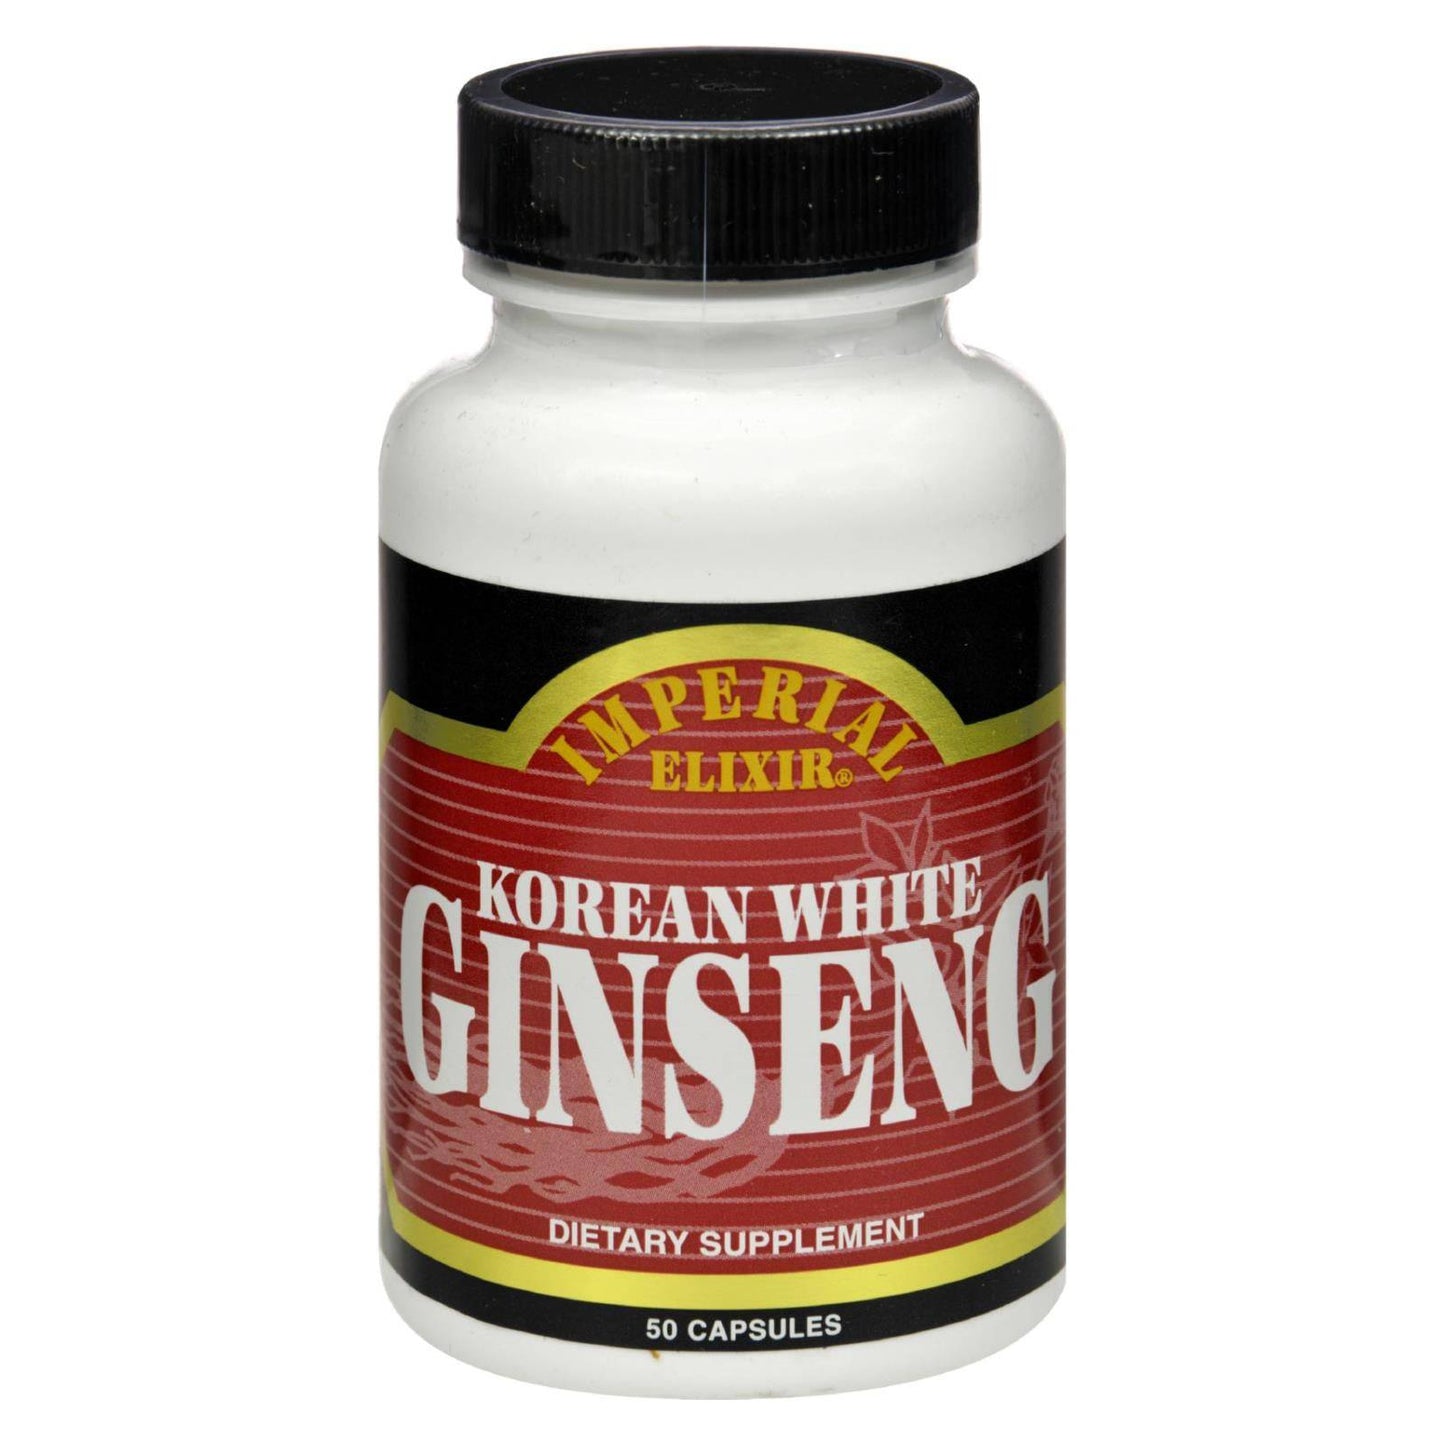 Buy Imperial Elixir Korean White Ginseng - 500 Mg - 50 Capsules  at OnlyNaturals.us